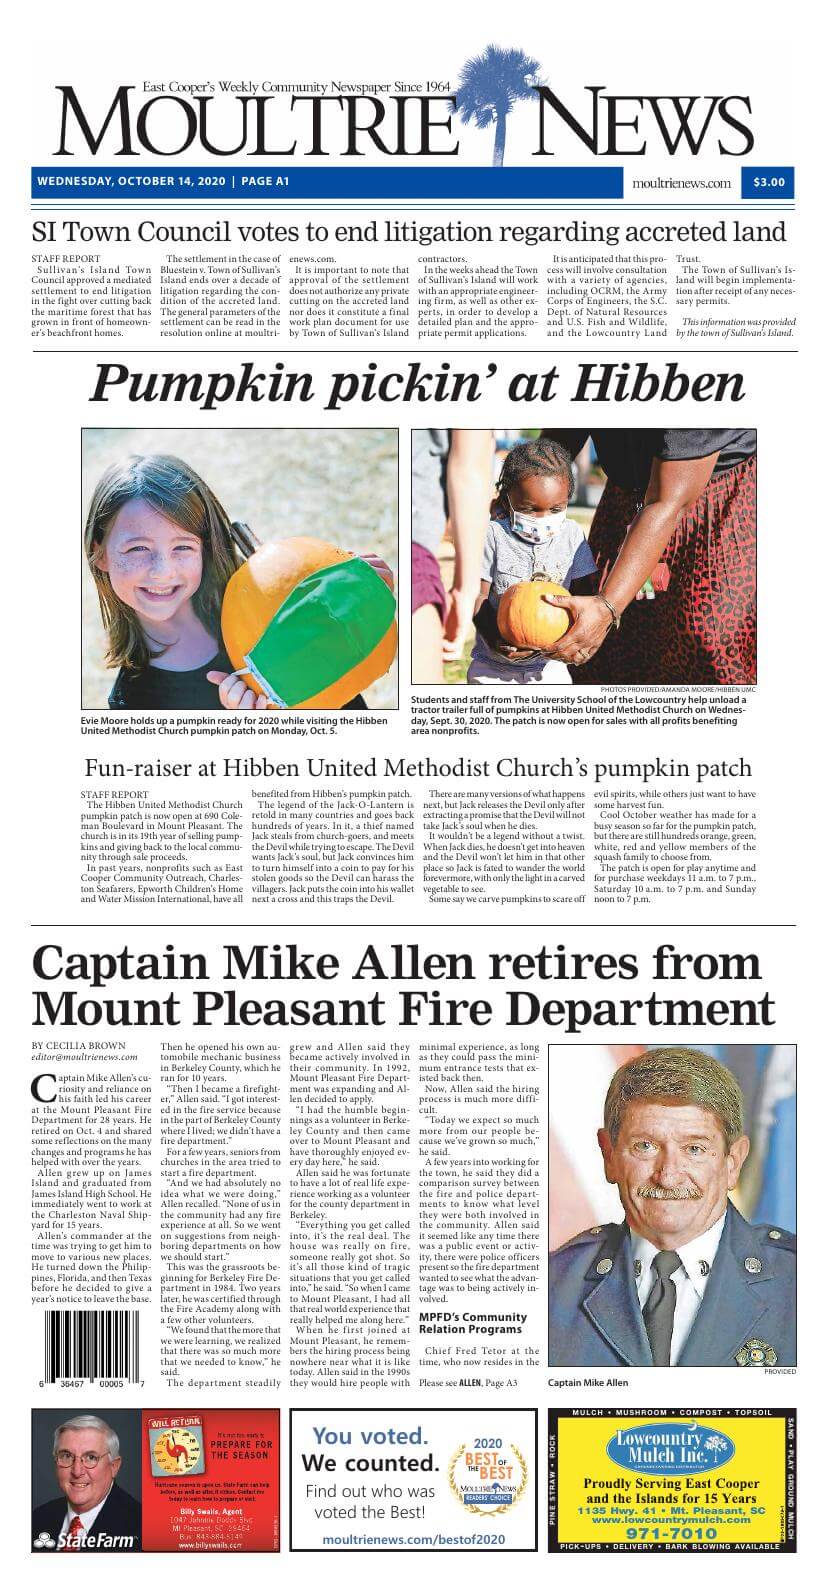 South Carolina Newspapers 06 Moultrie News